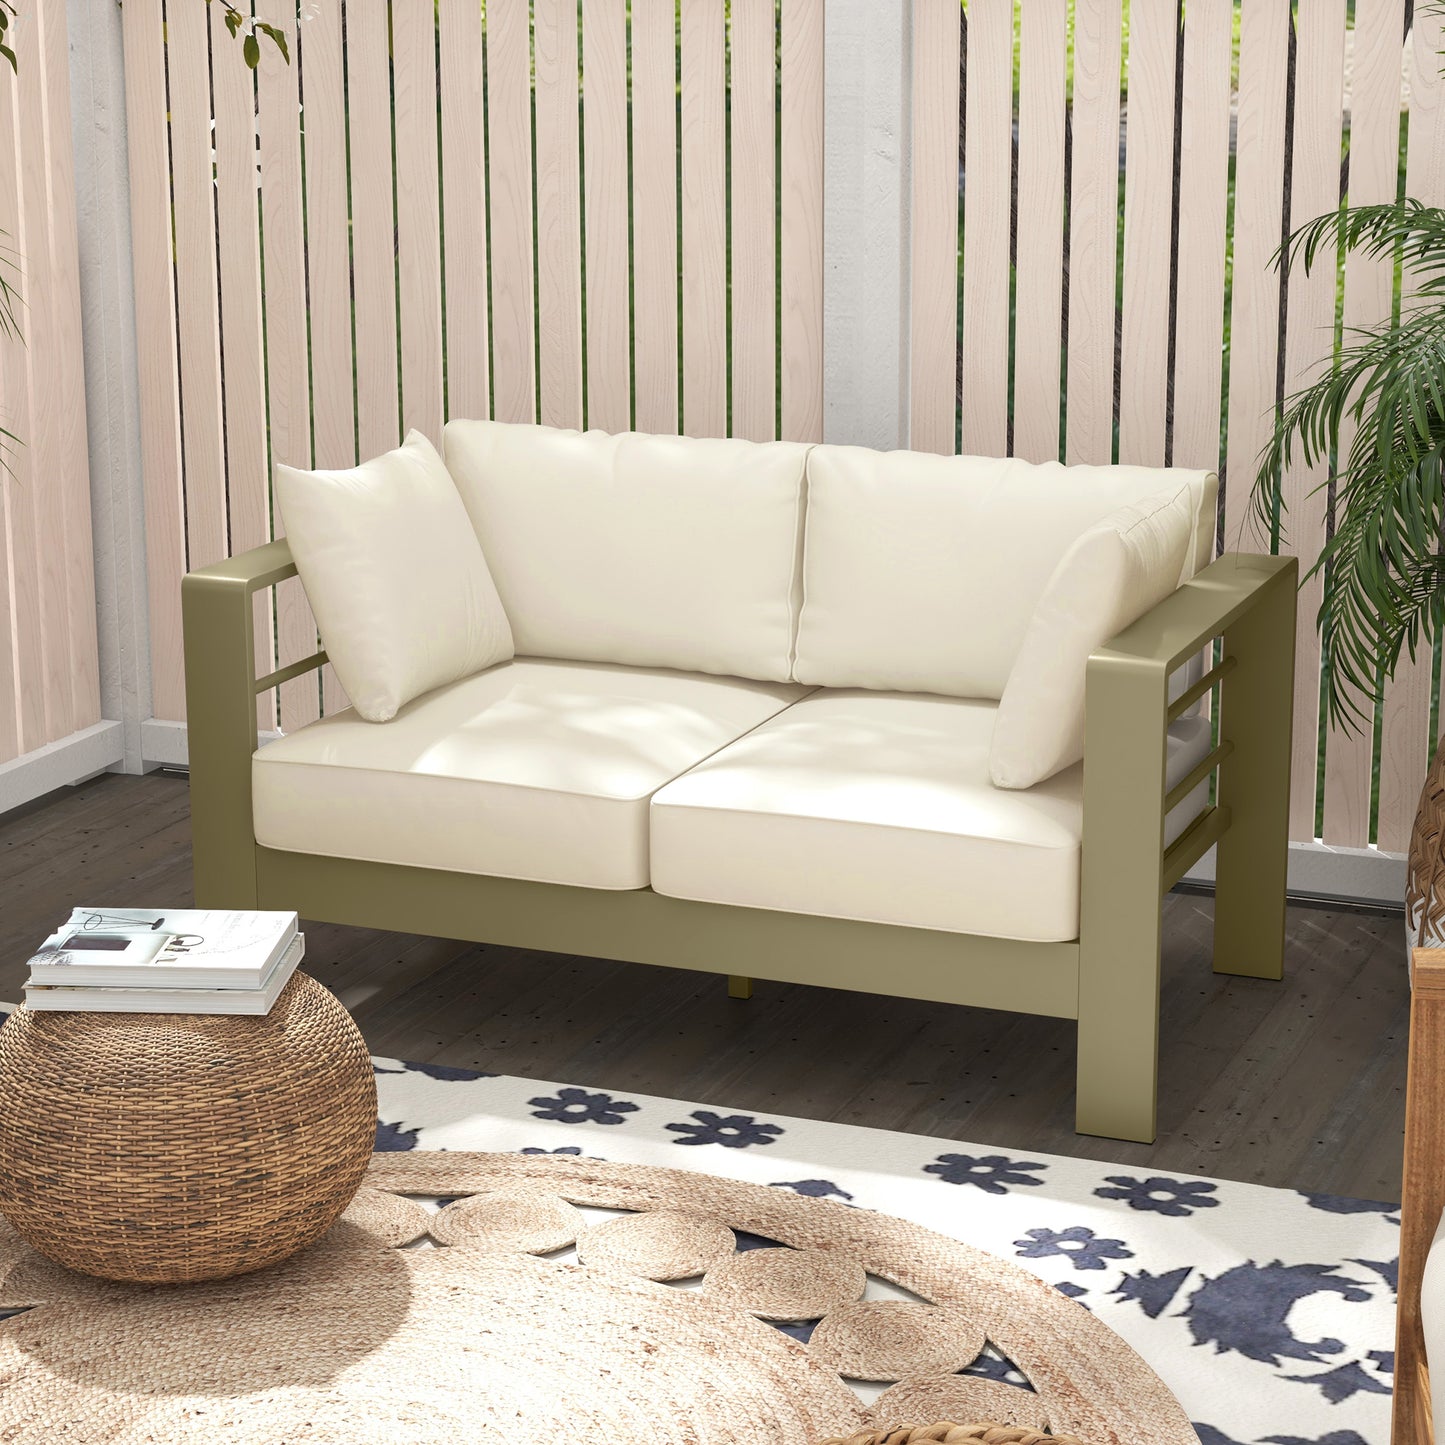 Outsunny Patio Loveseat, Outdoor Seating for 2, Garden Sofa with Cushions, Wide Armrests, 54.3"x27.6"x24.6", Cream White